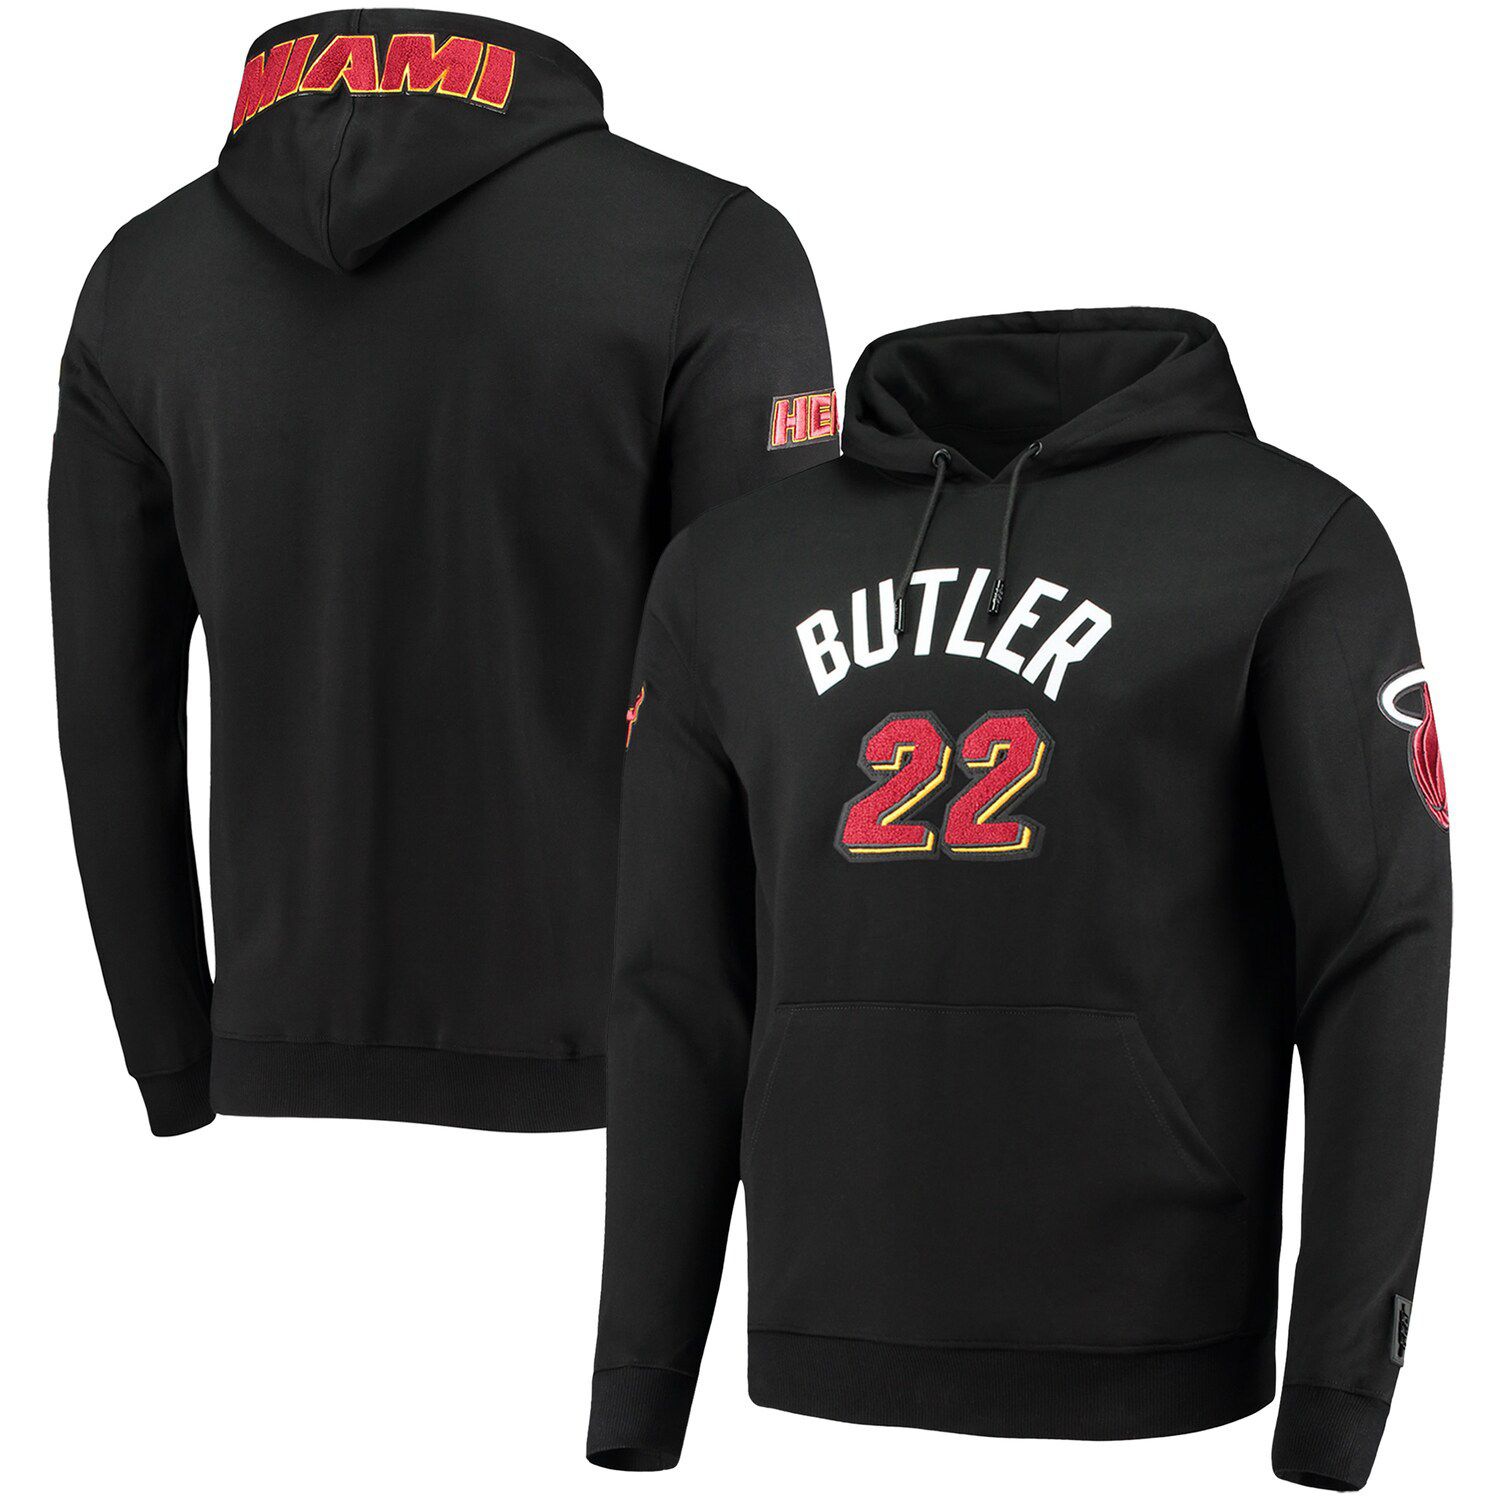 Image for Unbranded Men's Pro Standard Jimmy Butler Black Miami Heat Player Pullover Hoodie at Kohl's.